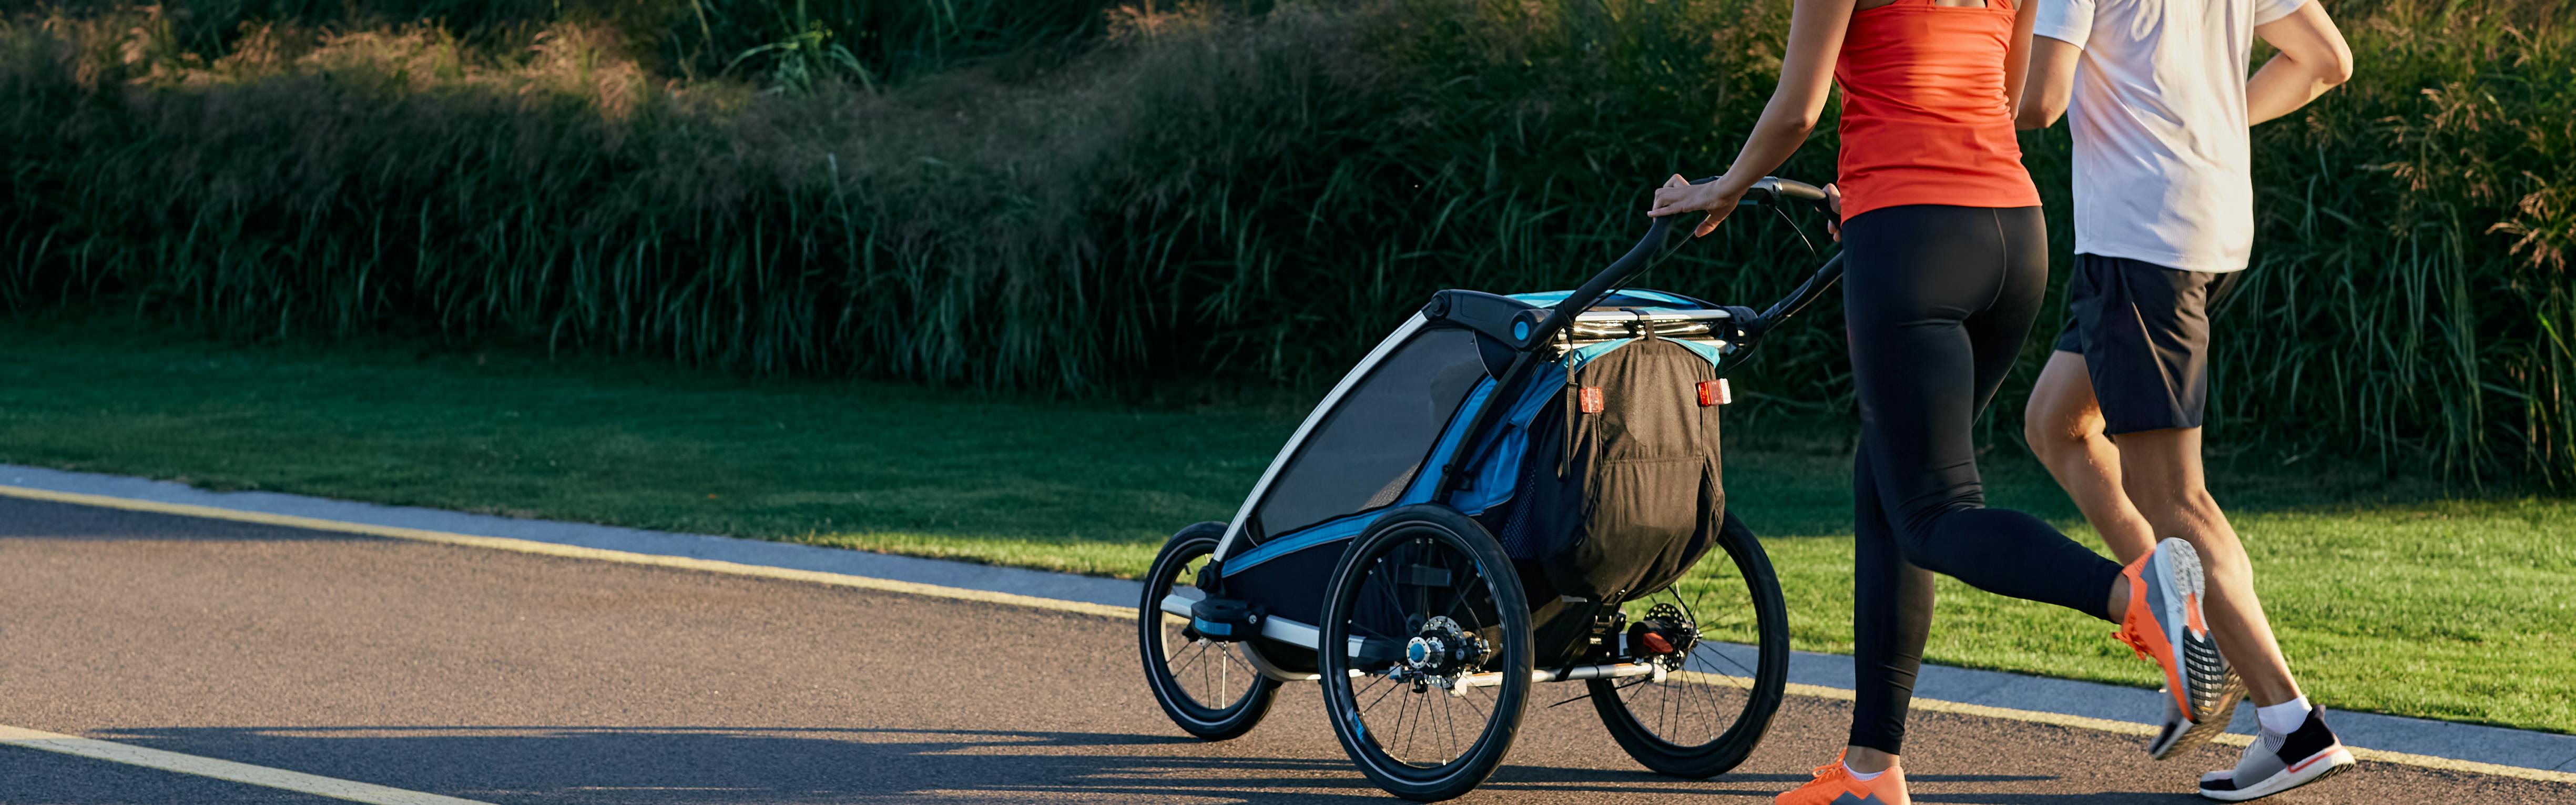 Two people walking with a baby in stroller